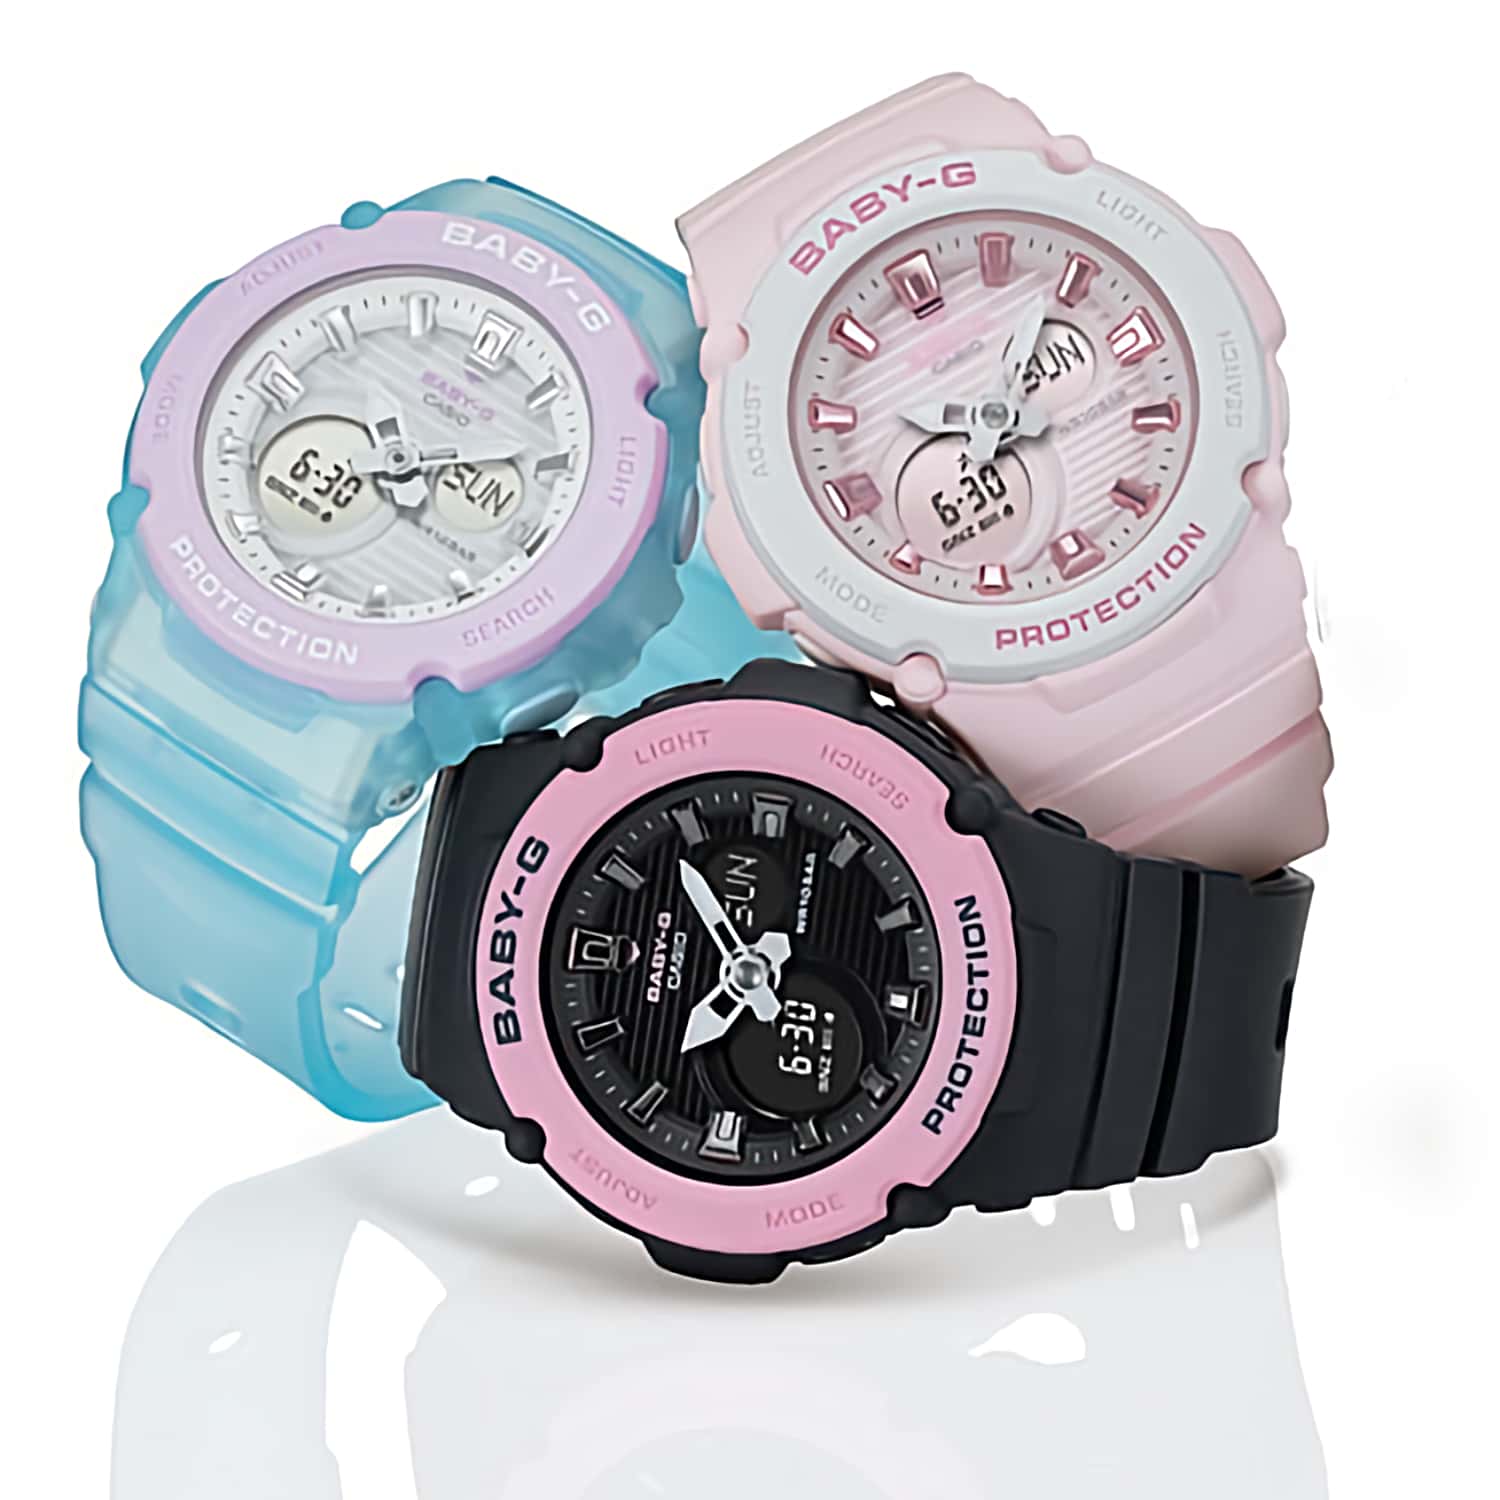 BGA270-4A Casio Baby-G Sports Watch. Introducing new models from BABY-G, the casual watch for active women. Two-piece bezels make it possible to create colourful combinations, and a basic “PROTECTION” design adds to the overall sporty look of these watche